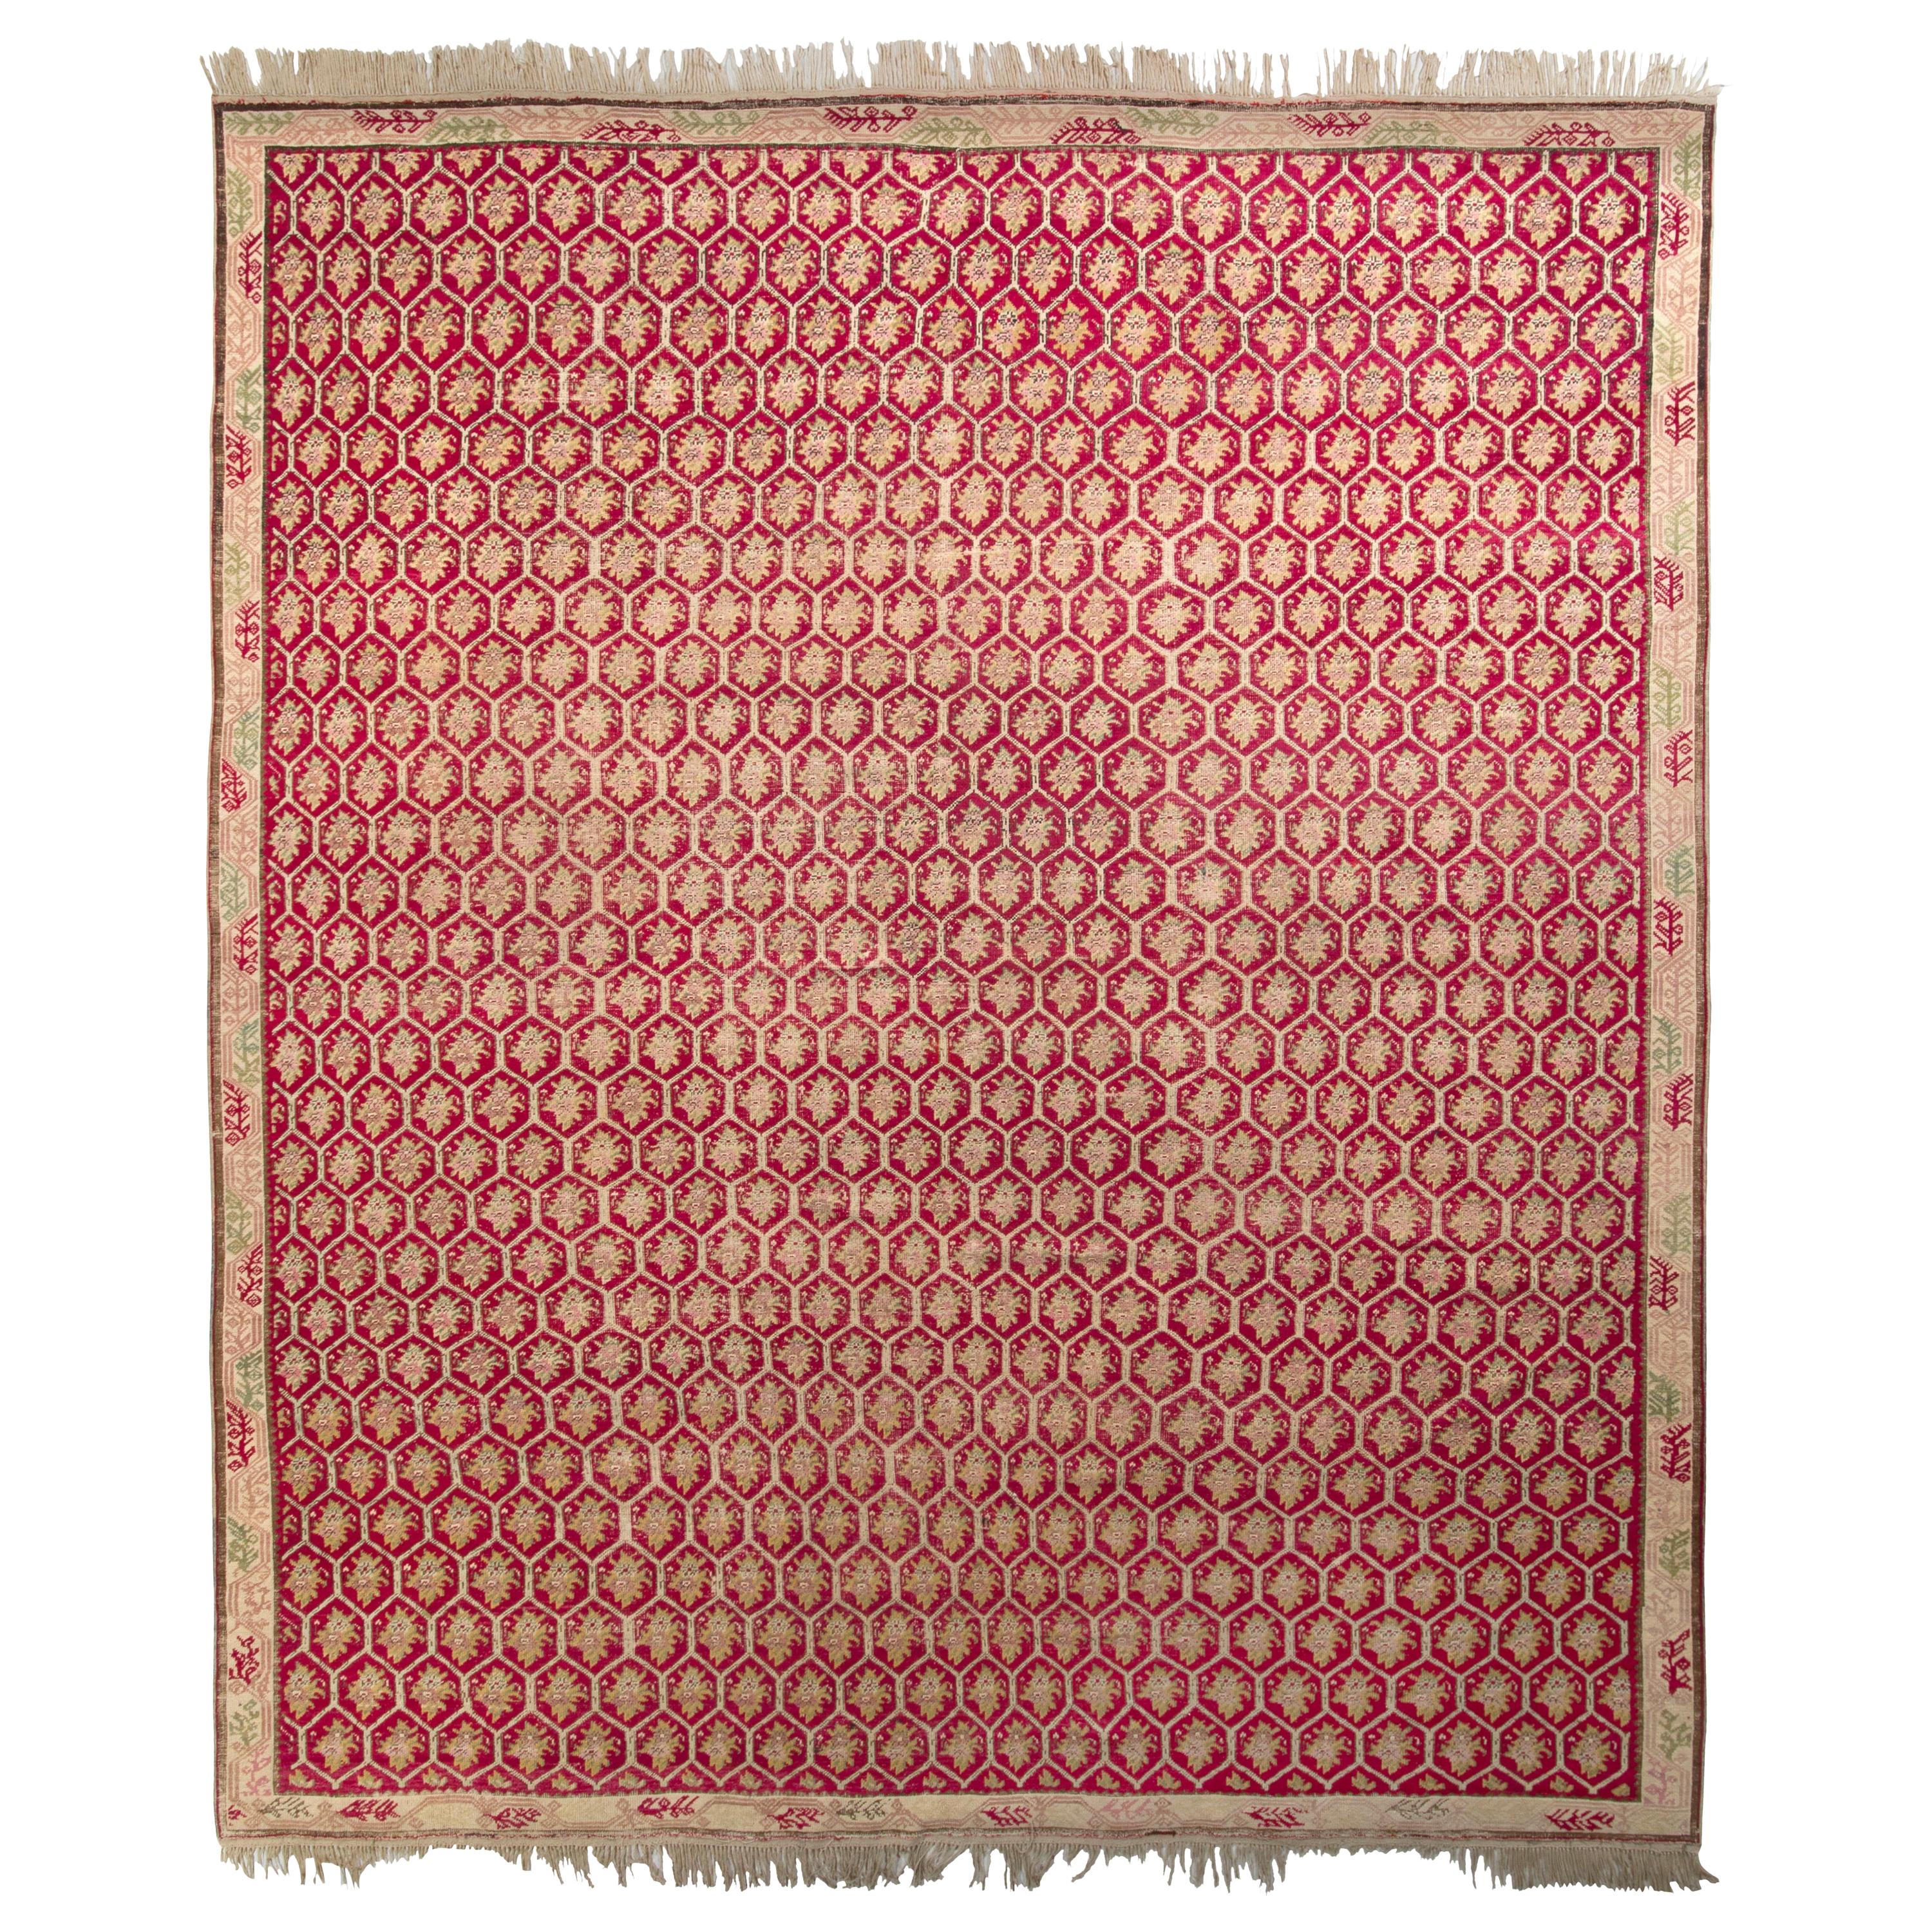 Handwoven Antique Anatolian Kilim Rug in Red All Over Pattern